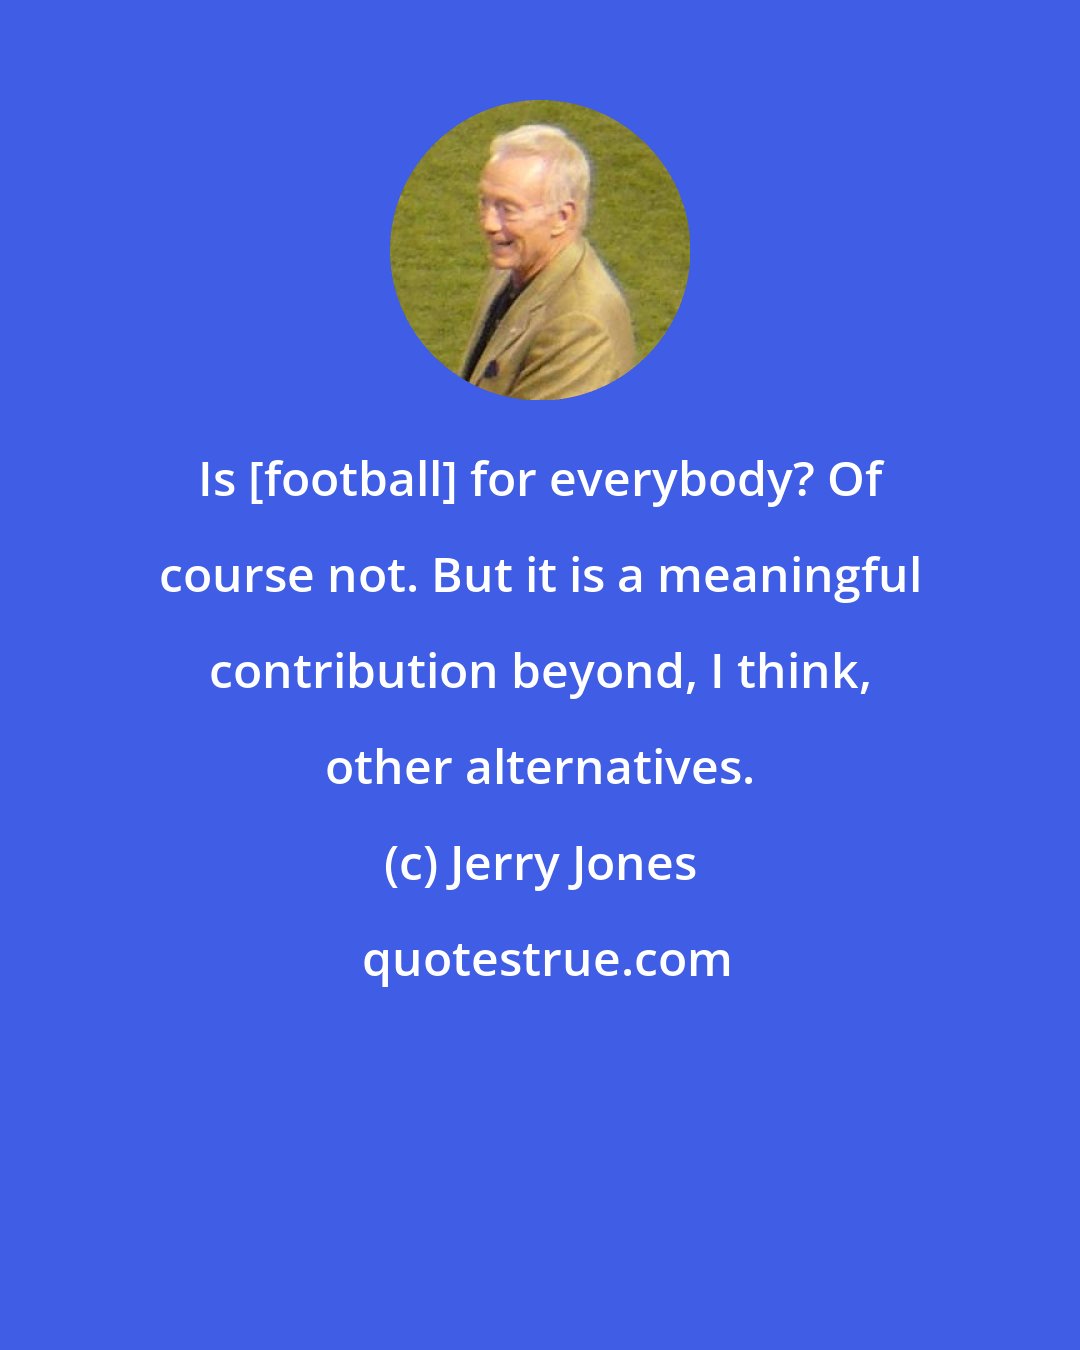 Jerry Jones: Is [football] for everybody? Of course not. But it is a meaningful contribution beyond, I think, other alternatives.